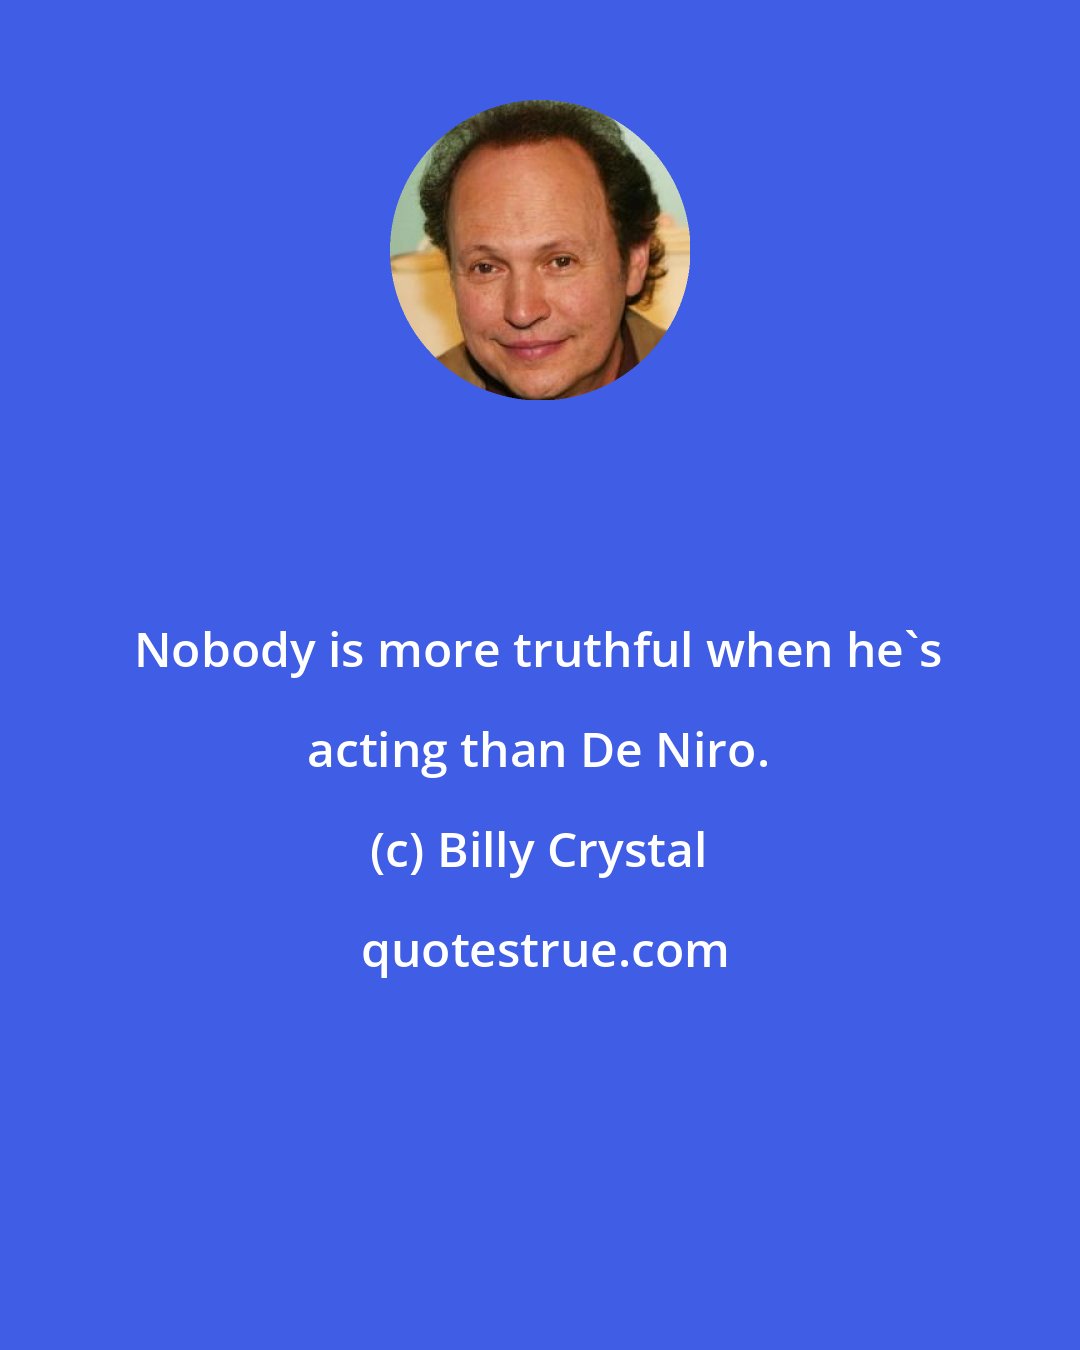 Billy Crystal: Nobody is more truthful when he's acting than De Niro.